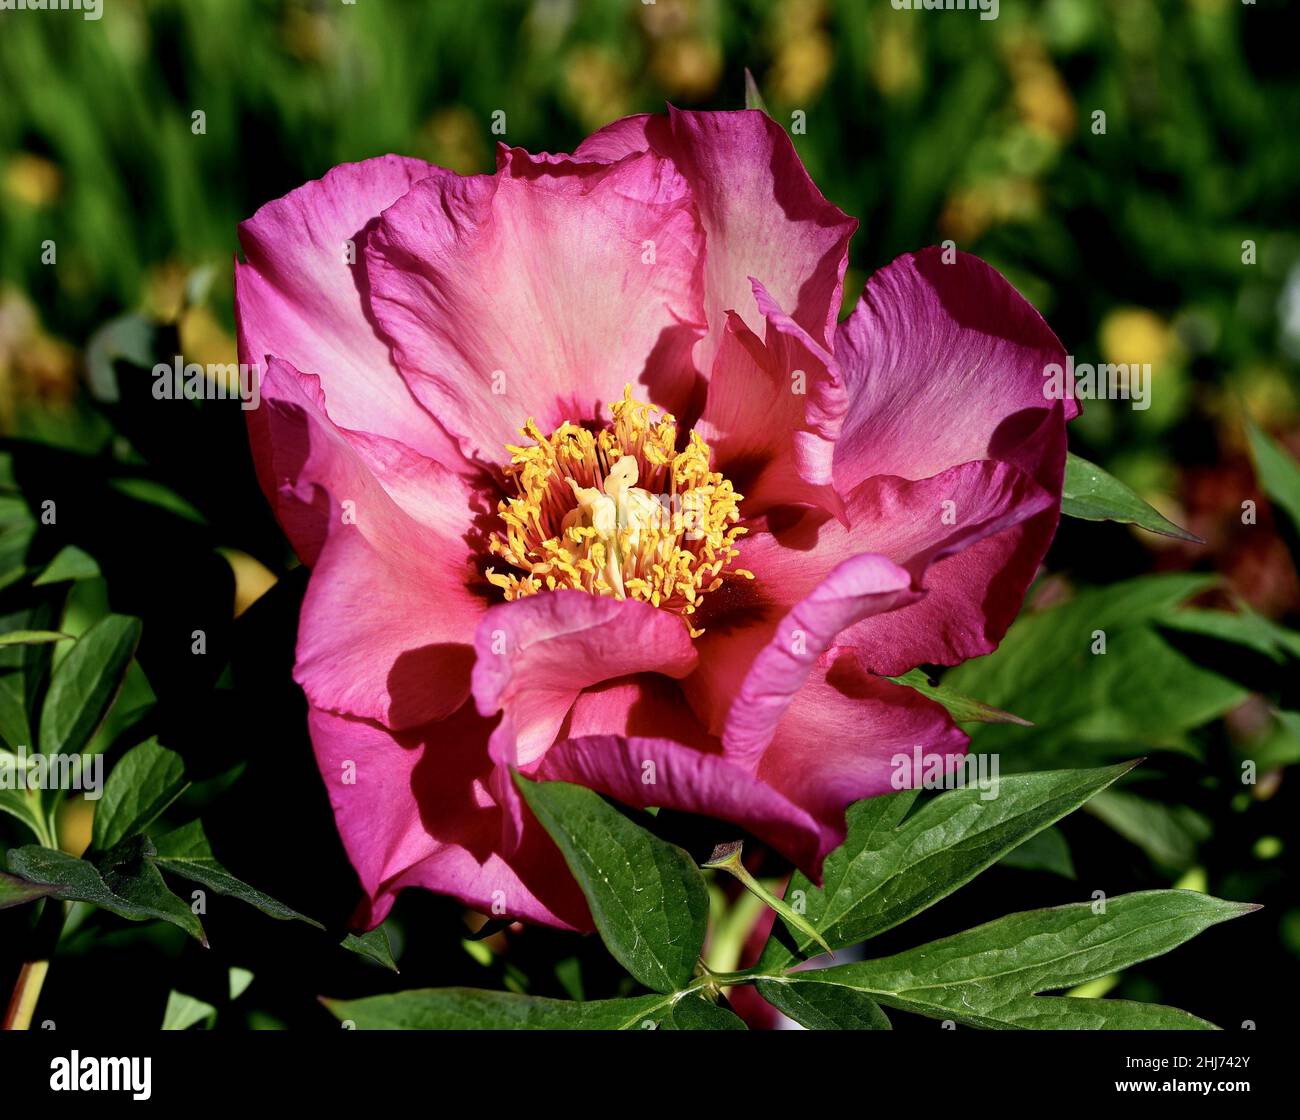 Closeup shot of Itoh Peony blooming in the garden Stock Photo